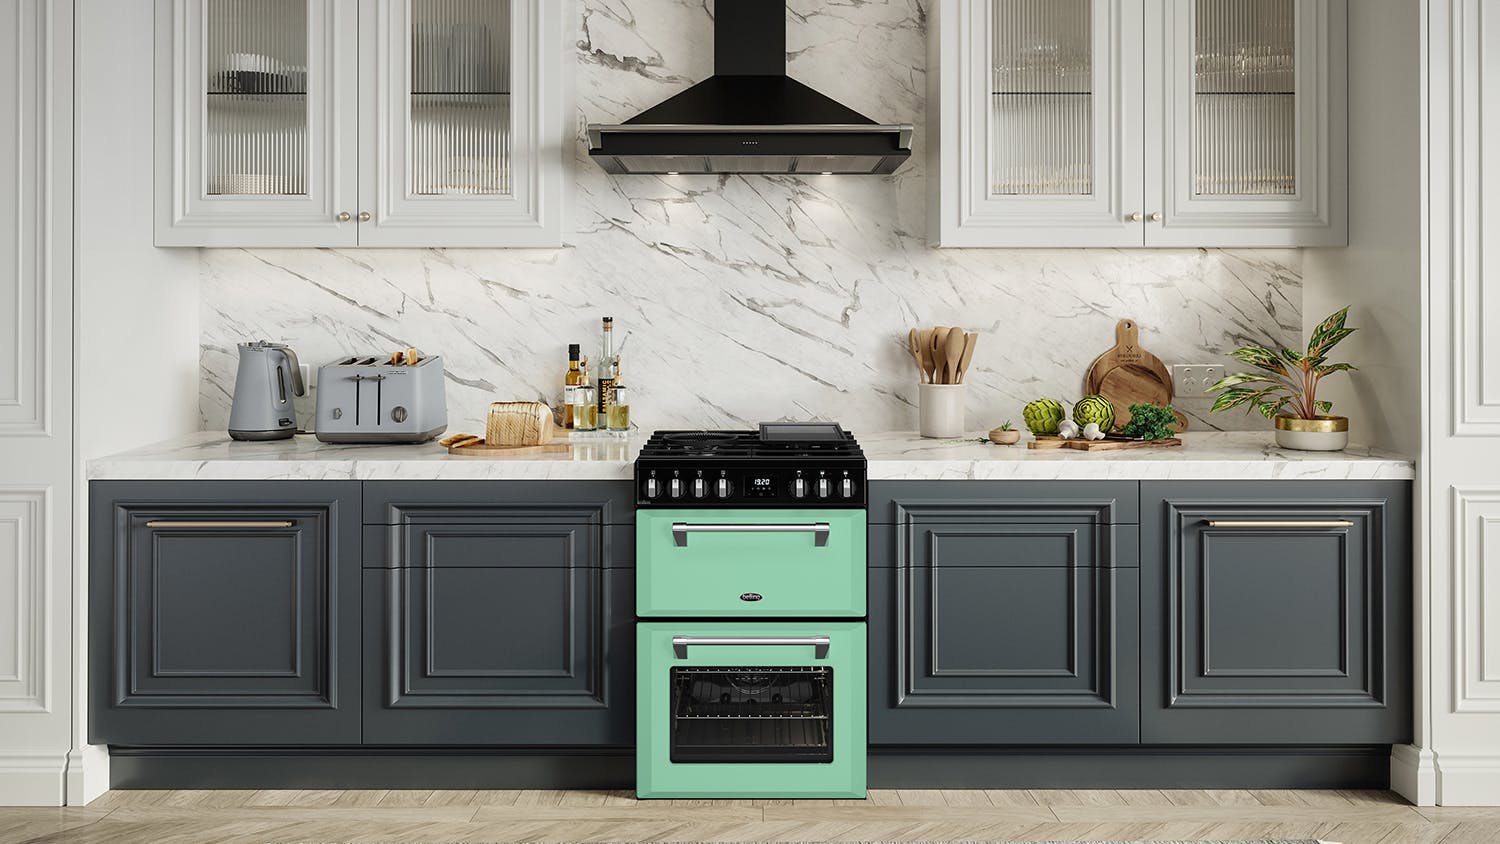 Belling 60cm Dual Fuel Freestanding Oven with Gas Cooktop - Mojito Mint (Colour Boutique Mini/BMR60DODFMM)